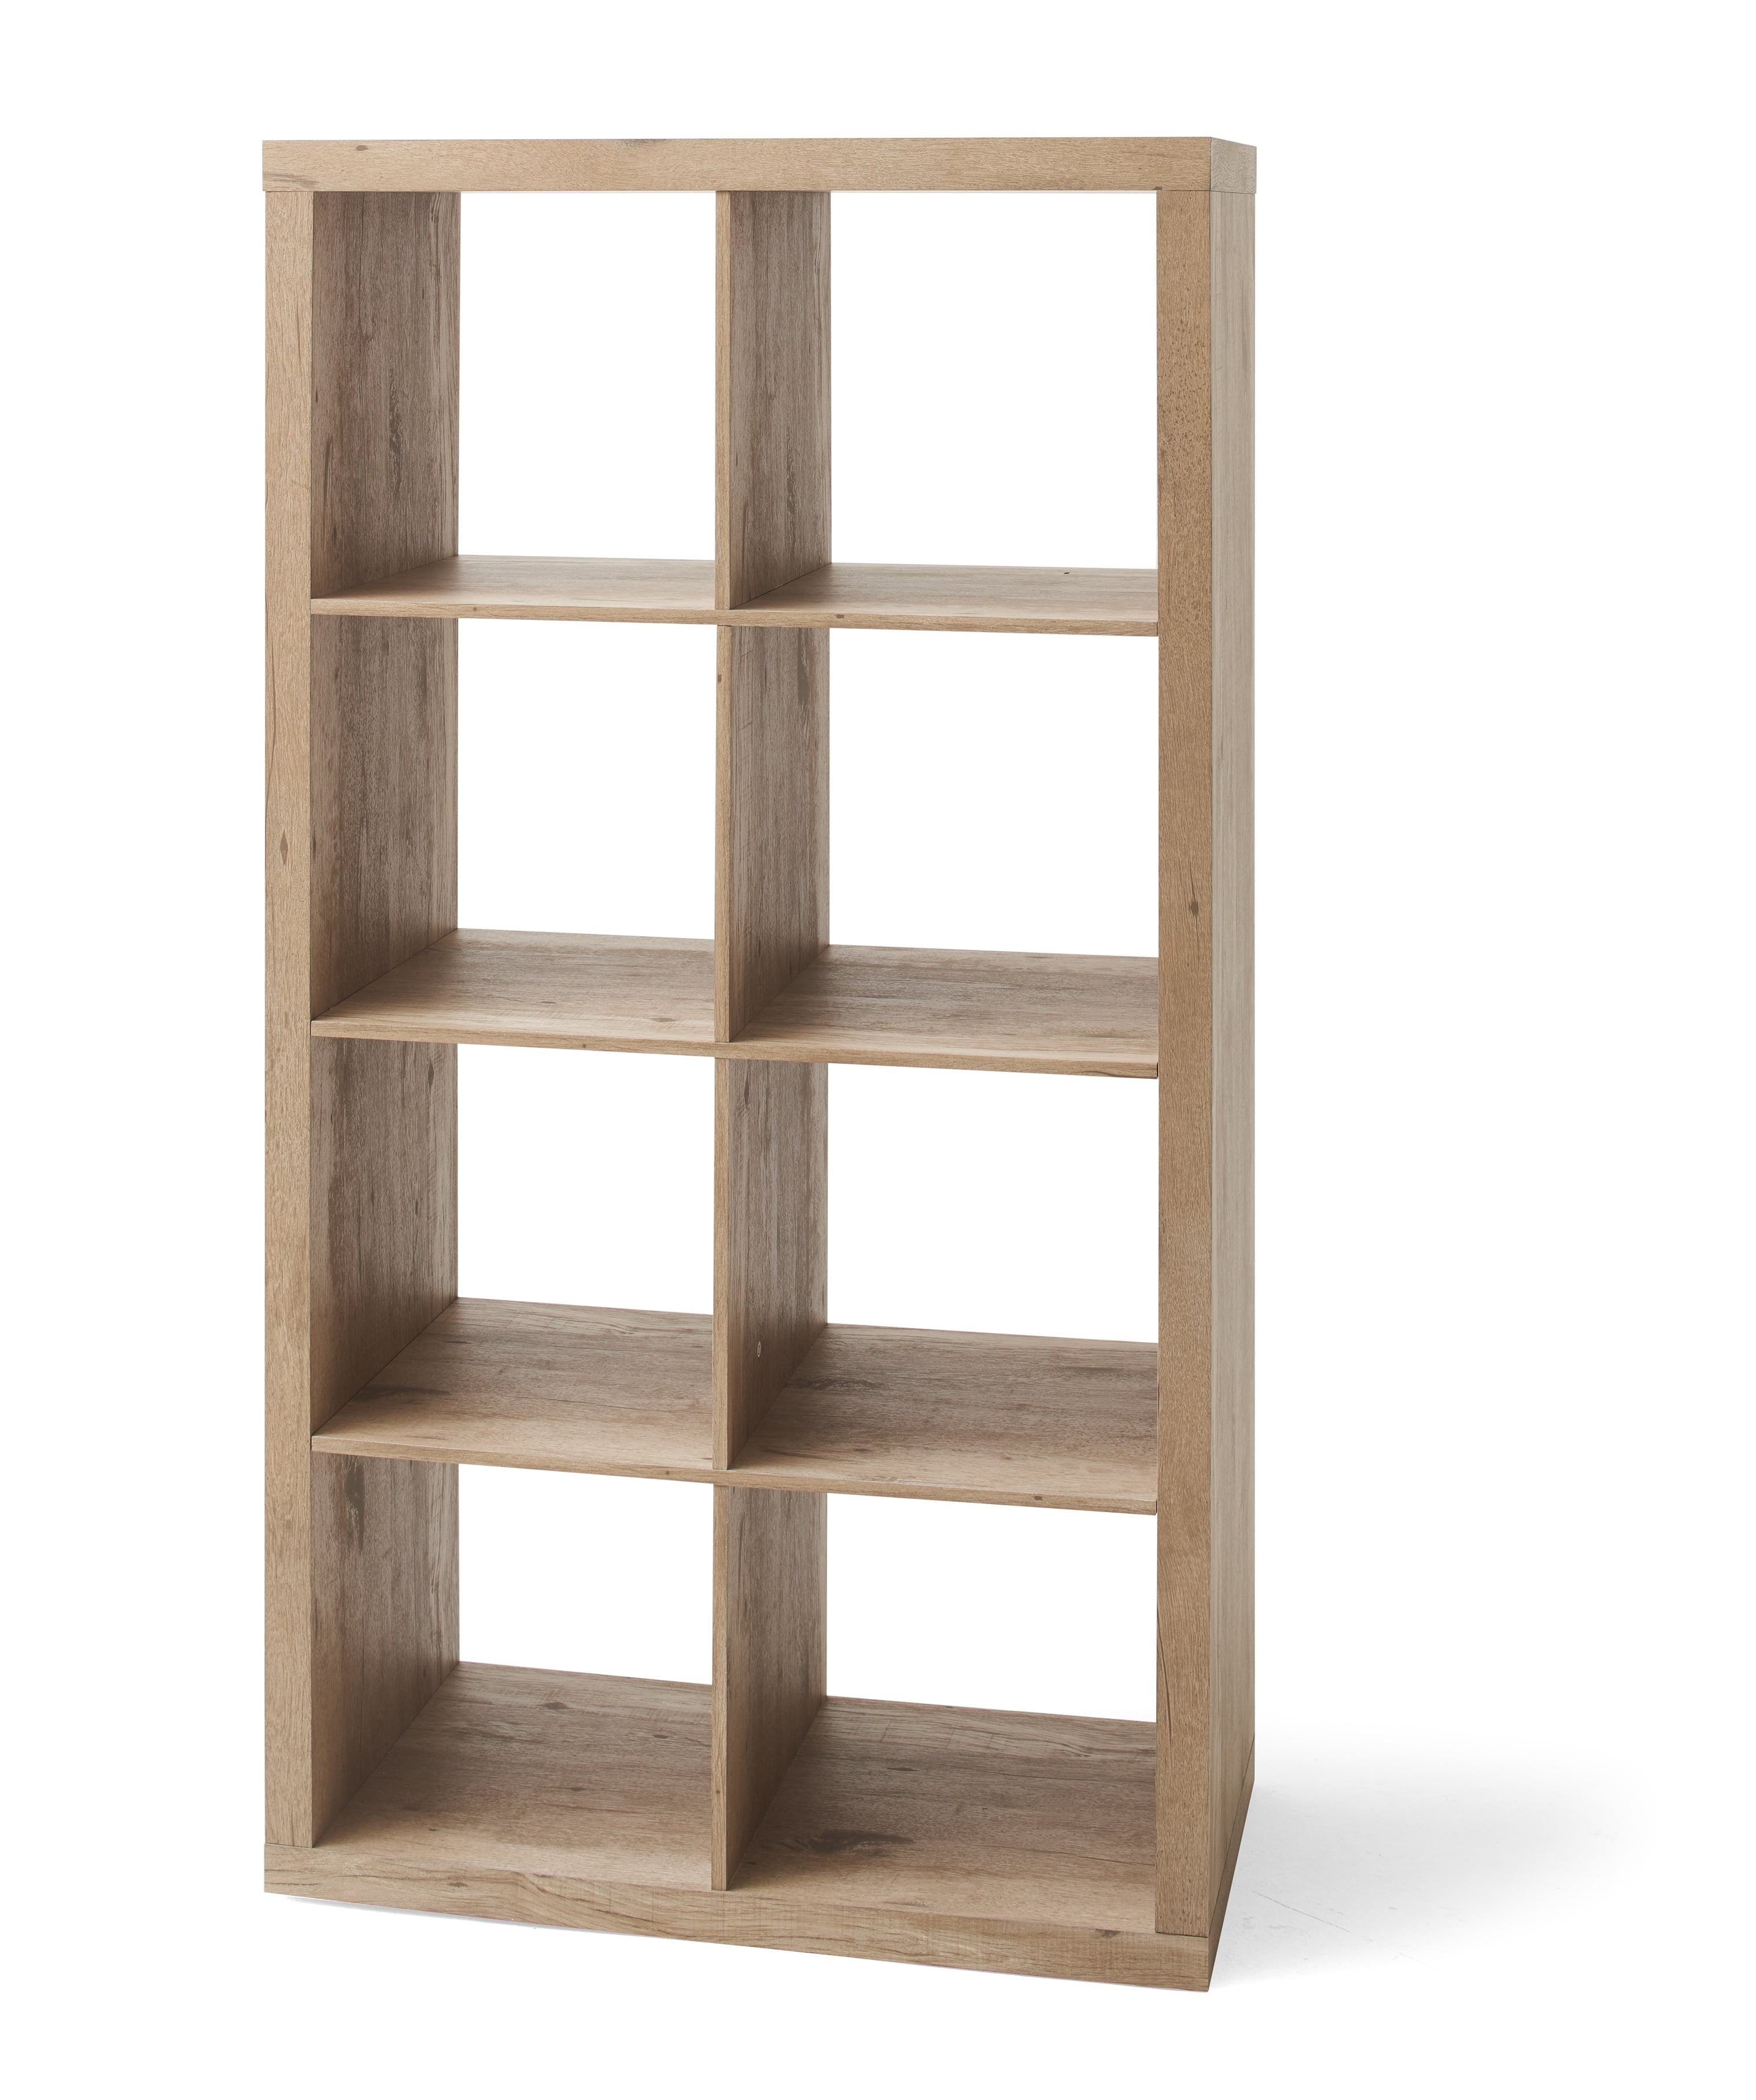 Better Homes and Gardens 25 Cube Organizer Room Divider Weathered for sale online 